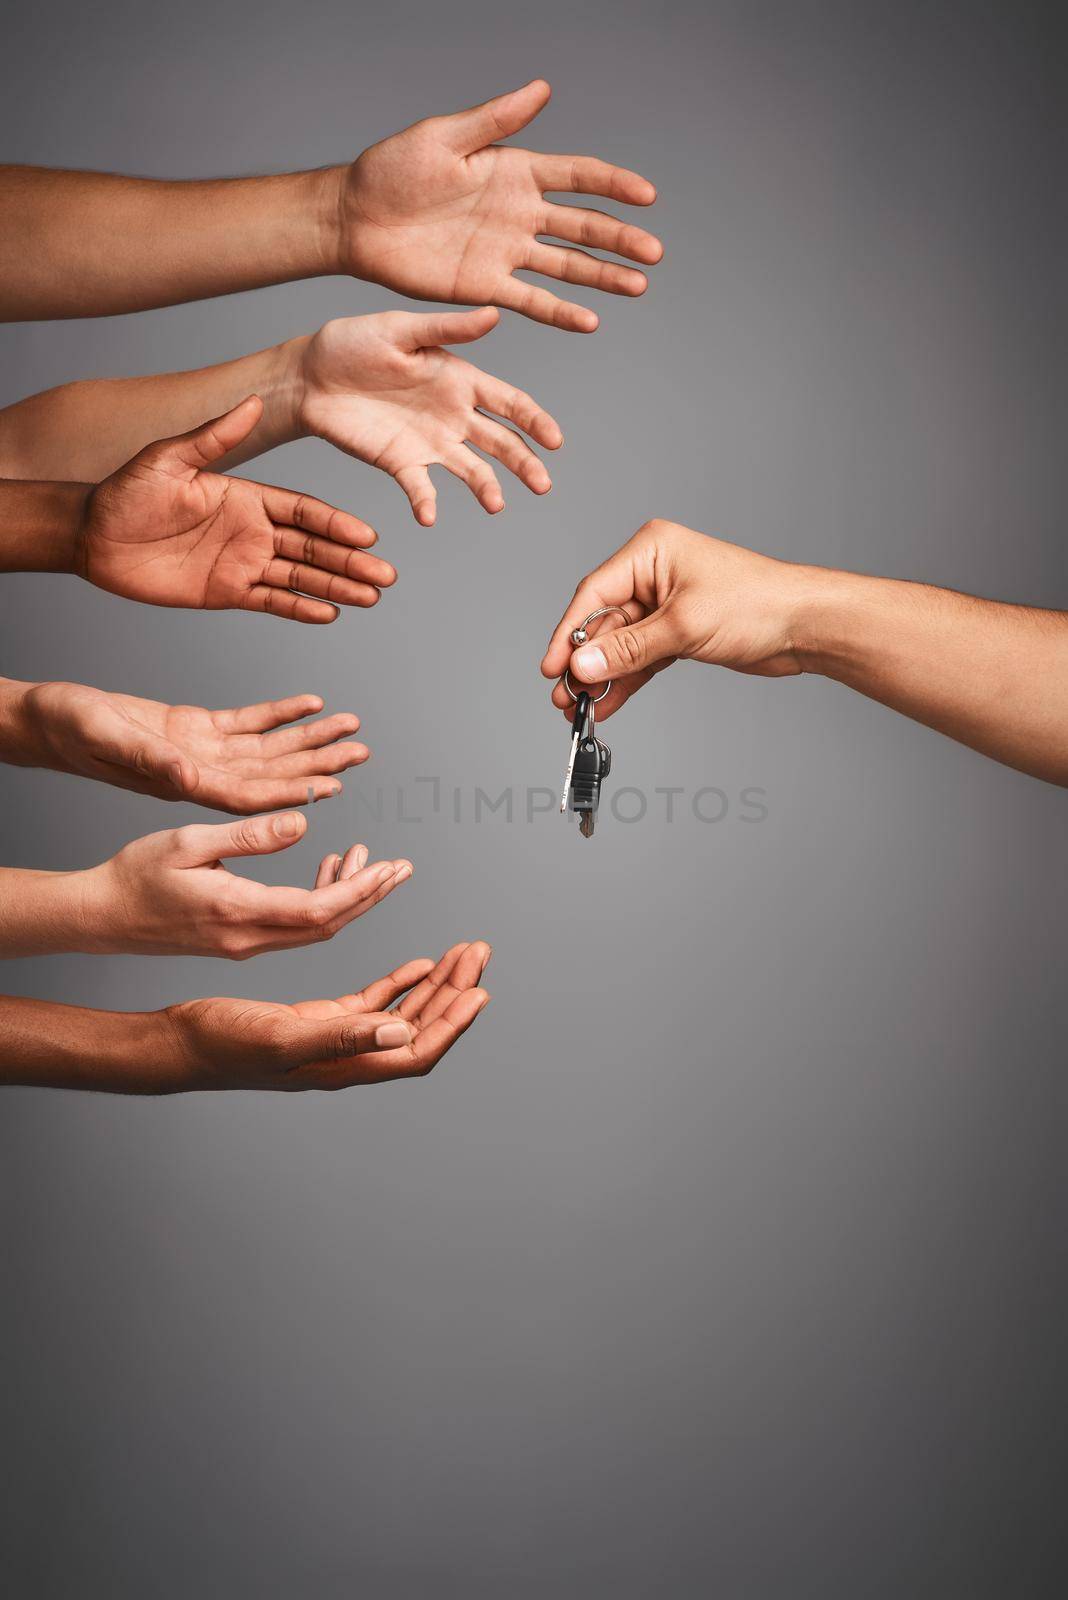 Studio shot of unidentifiable hands reaching for a set of keys against a gray background.